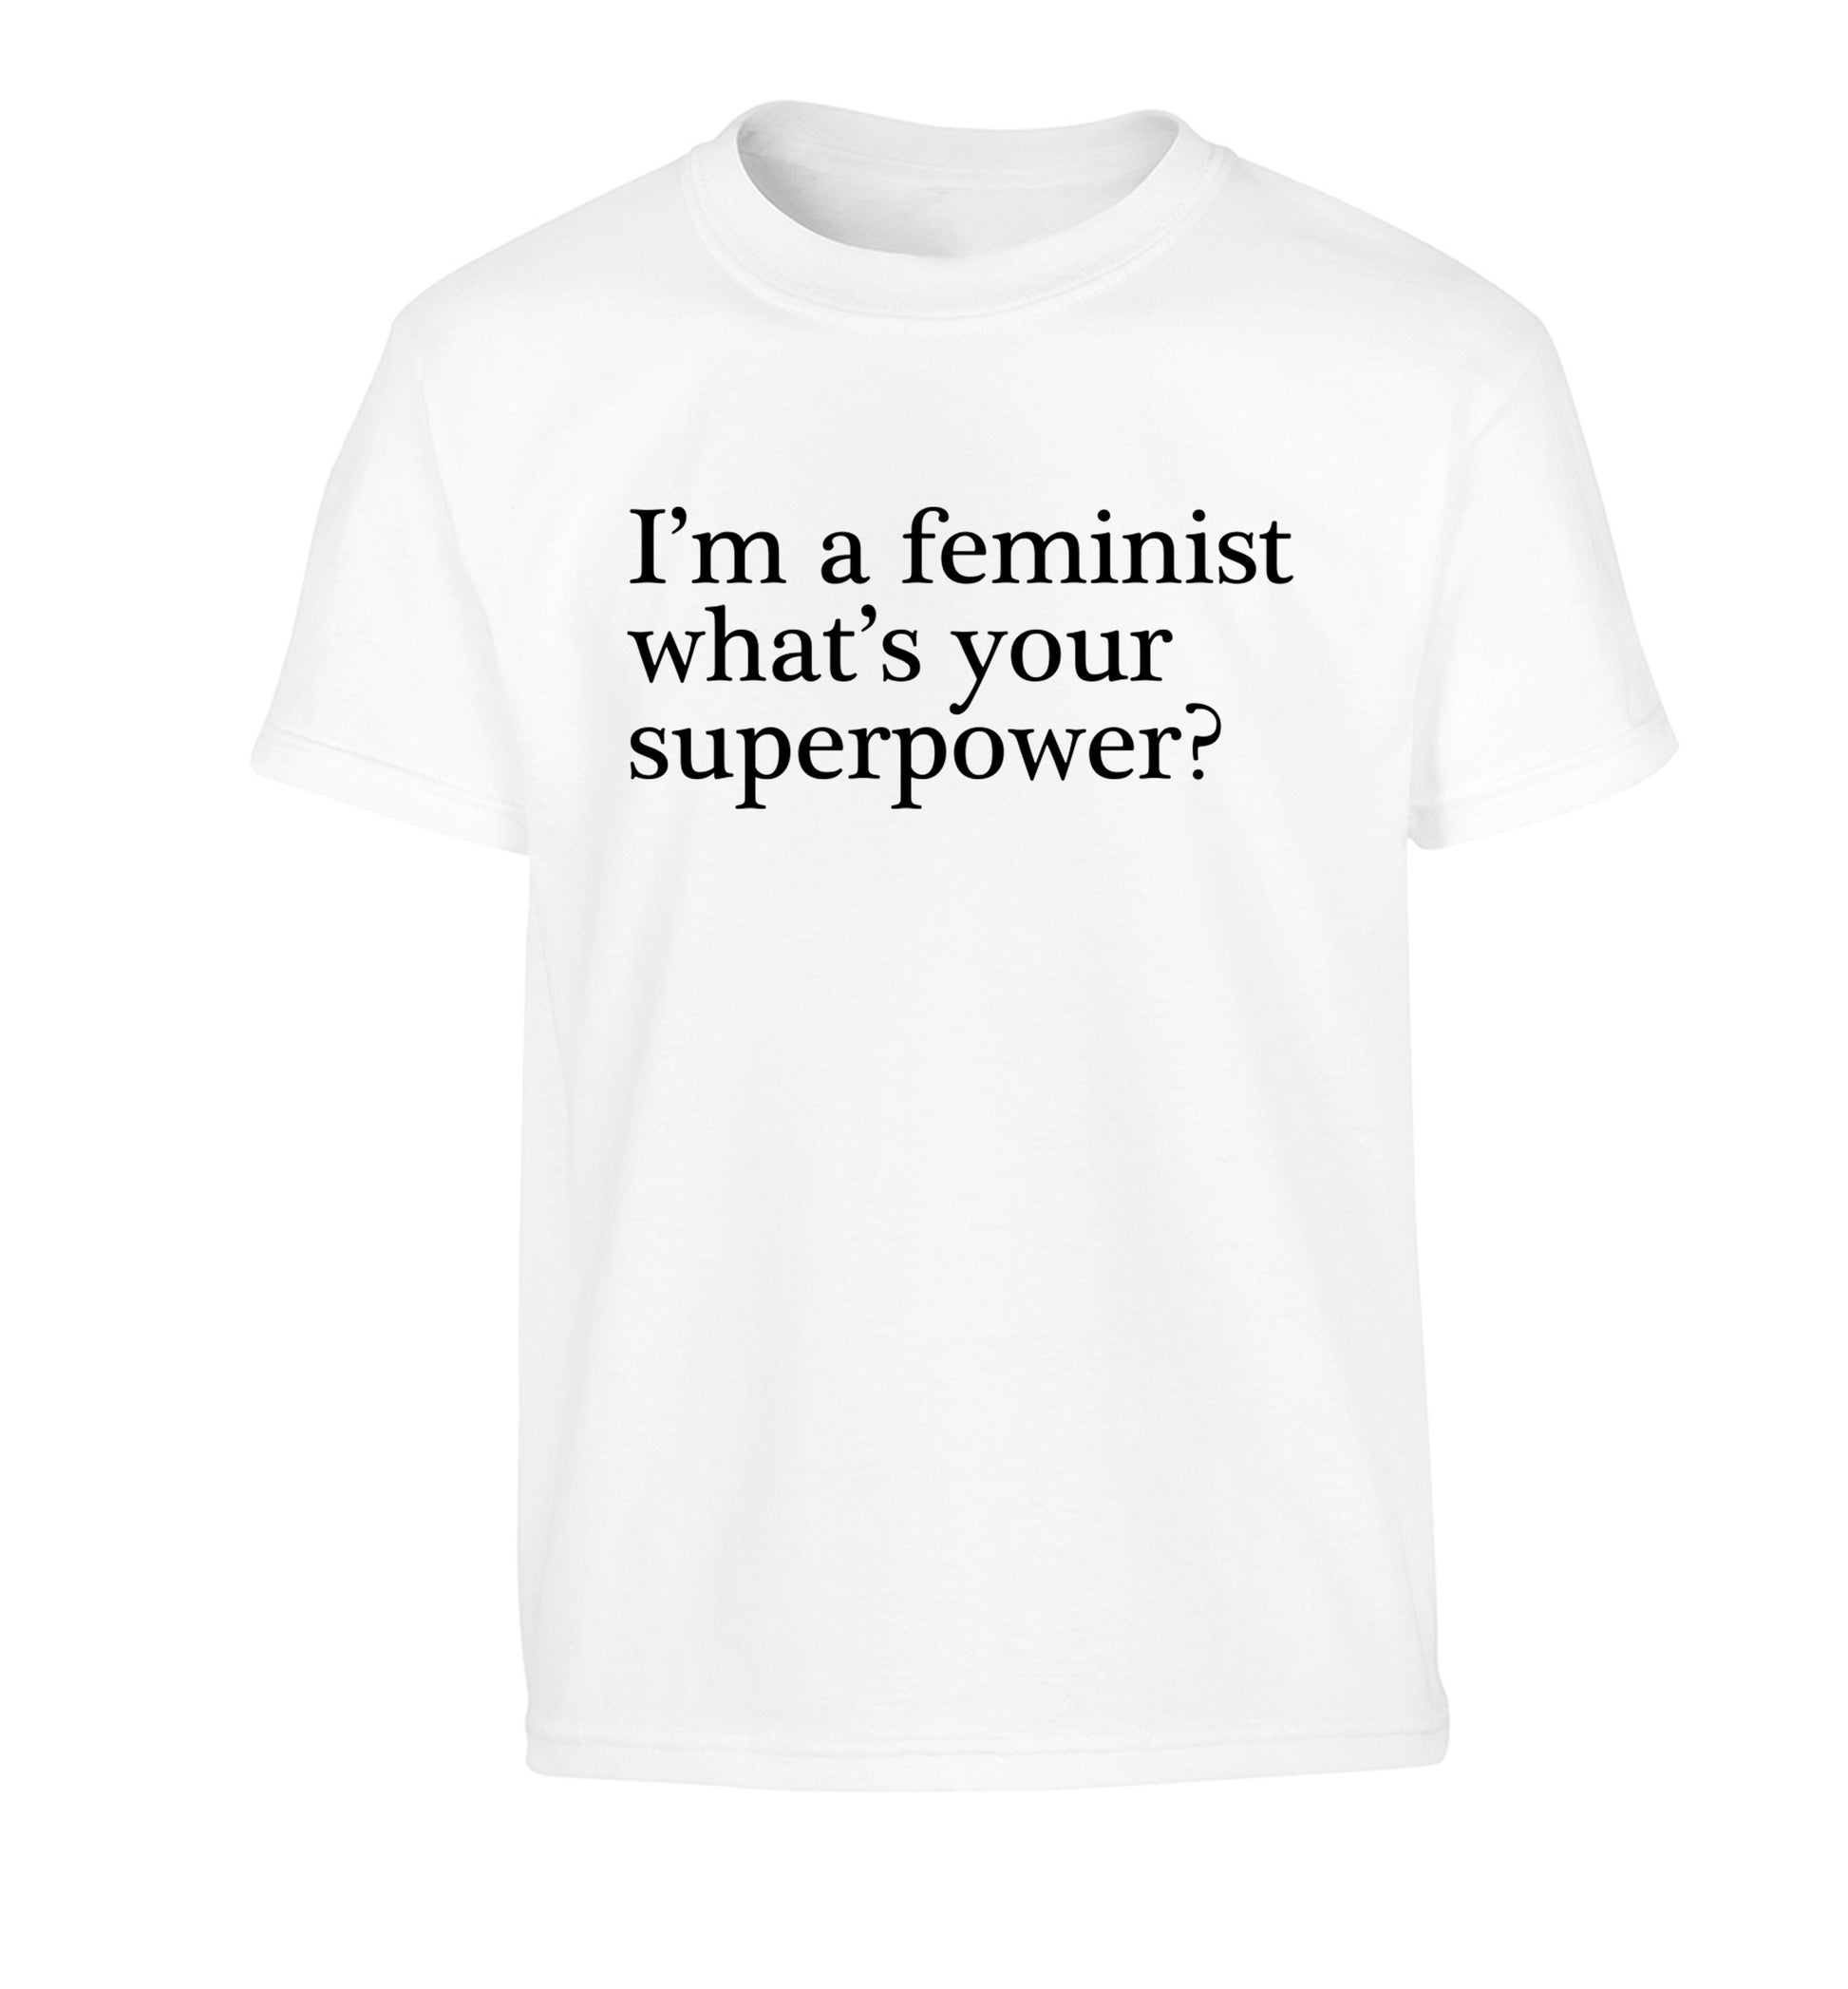 I'm a feminist what's your superpower? Children's white Tshirt 12-14 Years